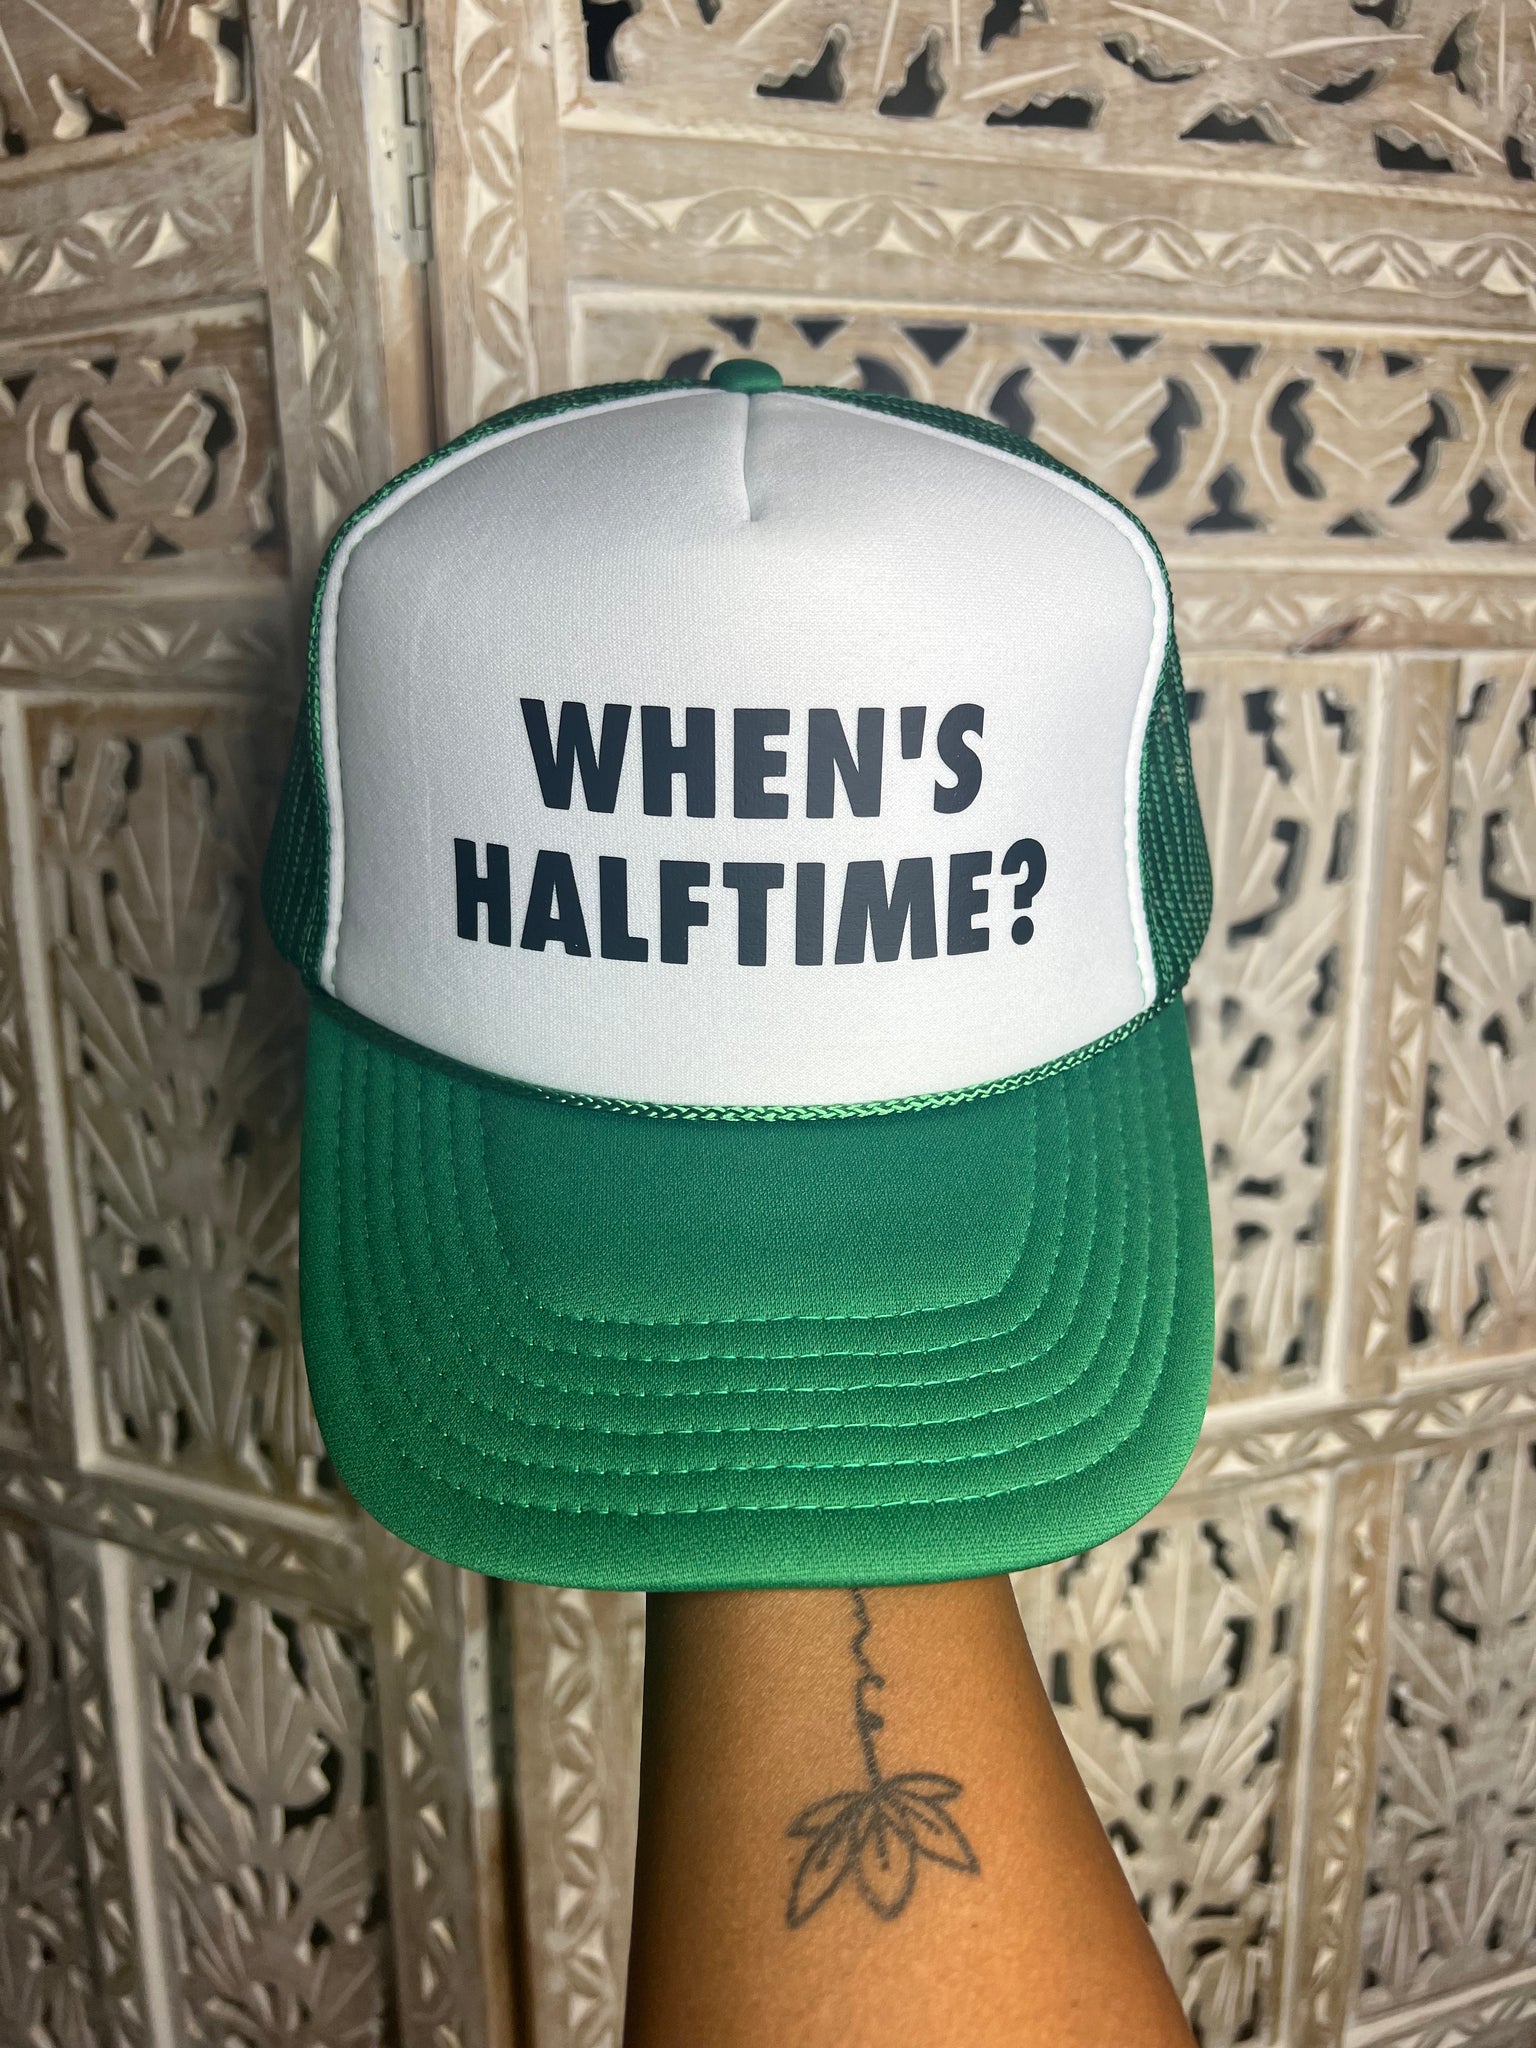 When's Halftime Trucker Hat-Eagles Fans ONLY!!!!!!